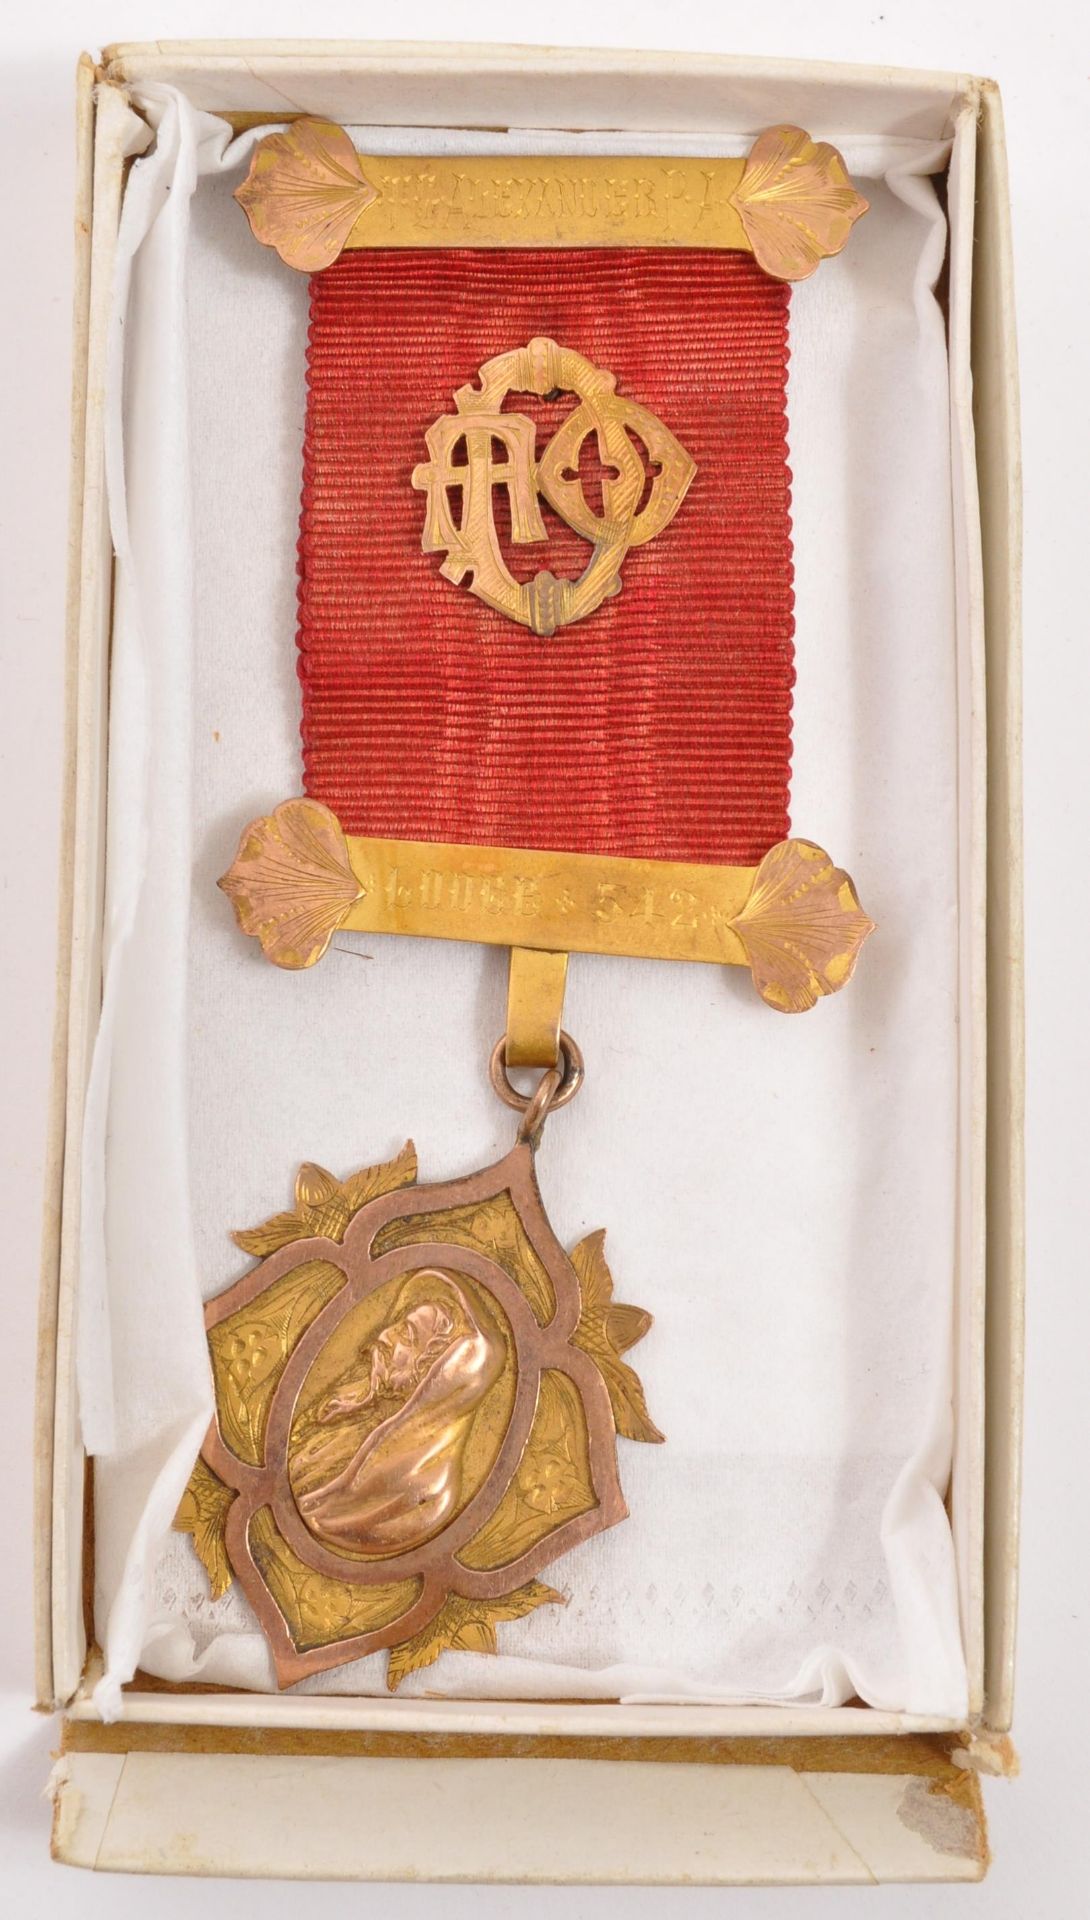 THREE EARLY 20TH CENTURY MASONIC MEDALS - CHALCEDONY - Image 6 of 7